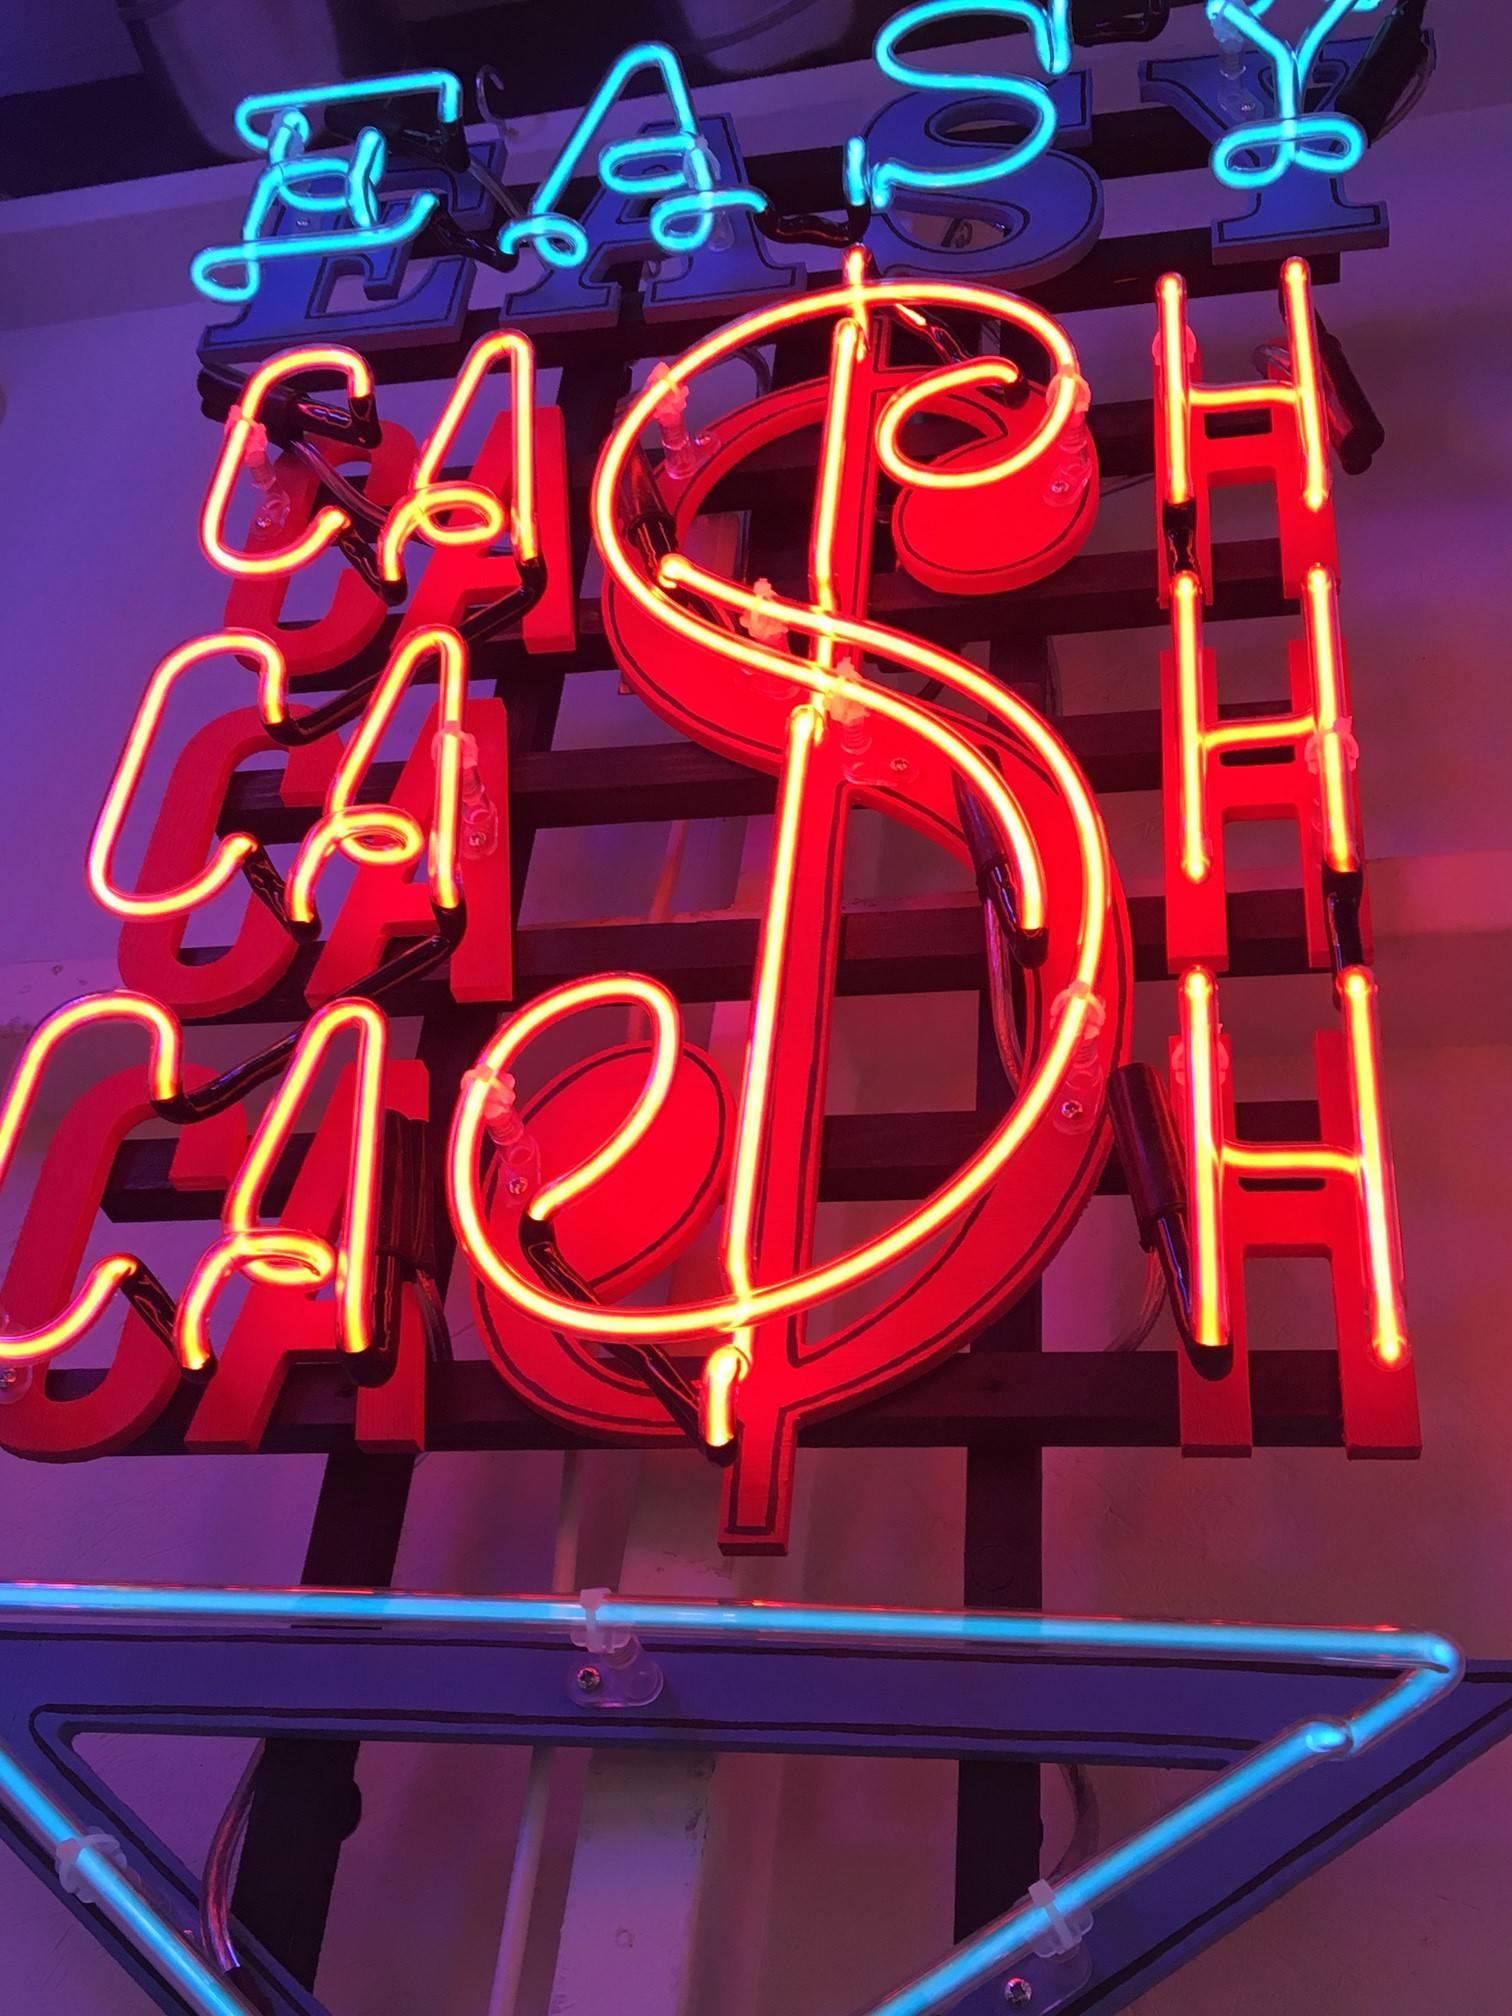 Easy Cash by Marcus Bracey

Blue and red neon, on hand-painted wooden lettering on wooden frame

Measures: 90 cm tall x 50 cm wide

£11,250 EX VAT/ £13,500 INC VAT

Edition of 3

Marcus Bracey is the eldest son of Gods Own Junkyard founder